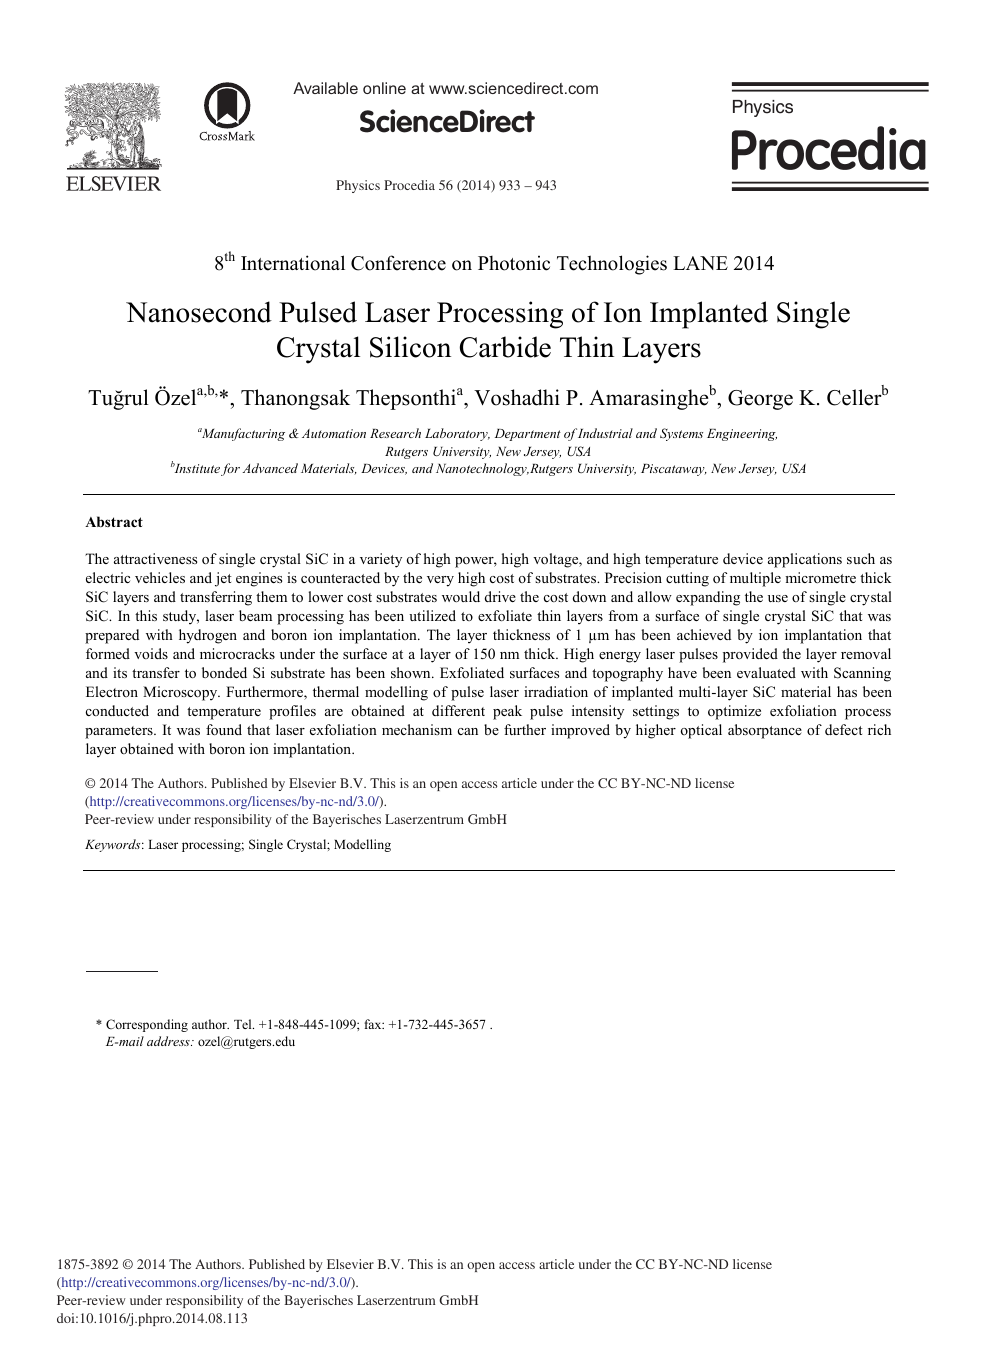 Nanosecond Pulsed Laser Processing Of Ion Implanted Single Crystal Silicon Carbide Thin Layers Topic Of Research Paper In Materials Engineering Download Scholarly Article Pdf And Read For Free On Cyberleninka Open